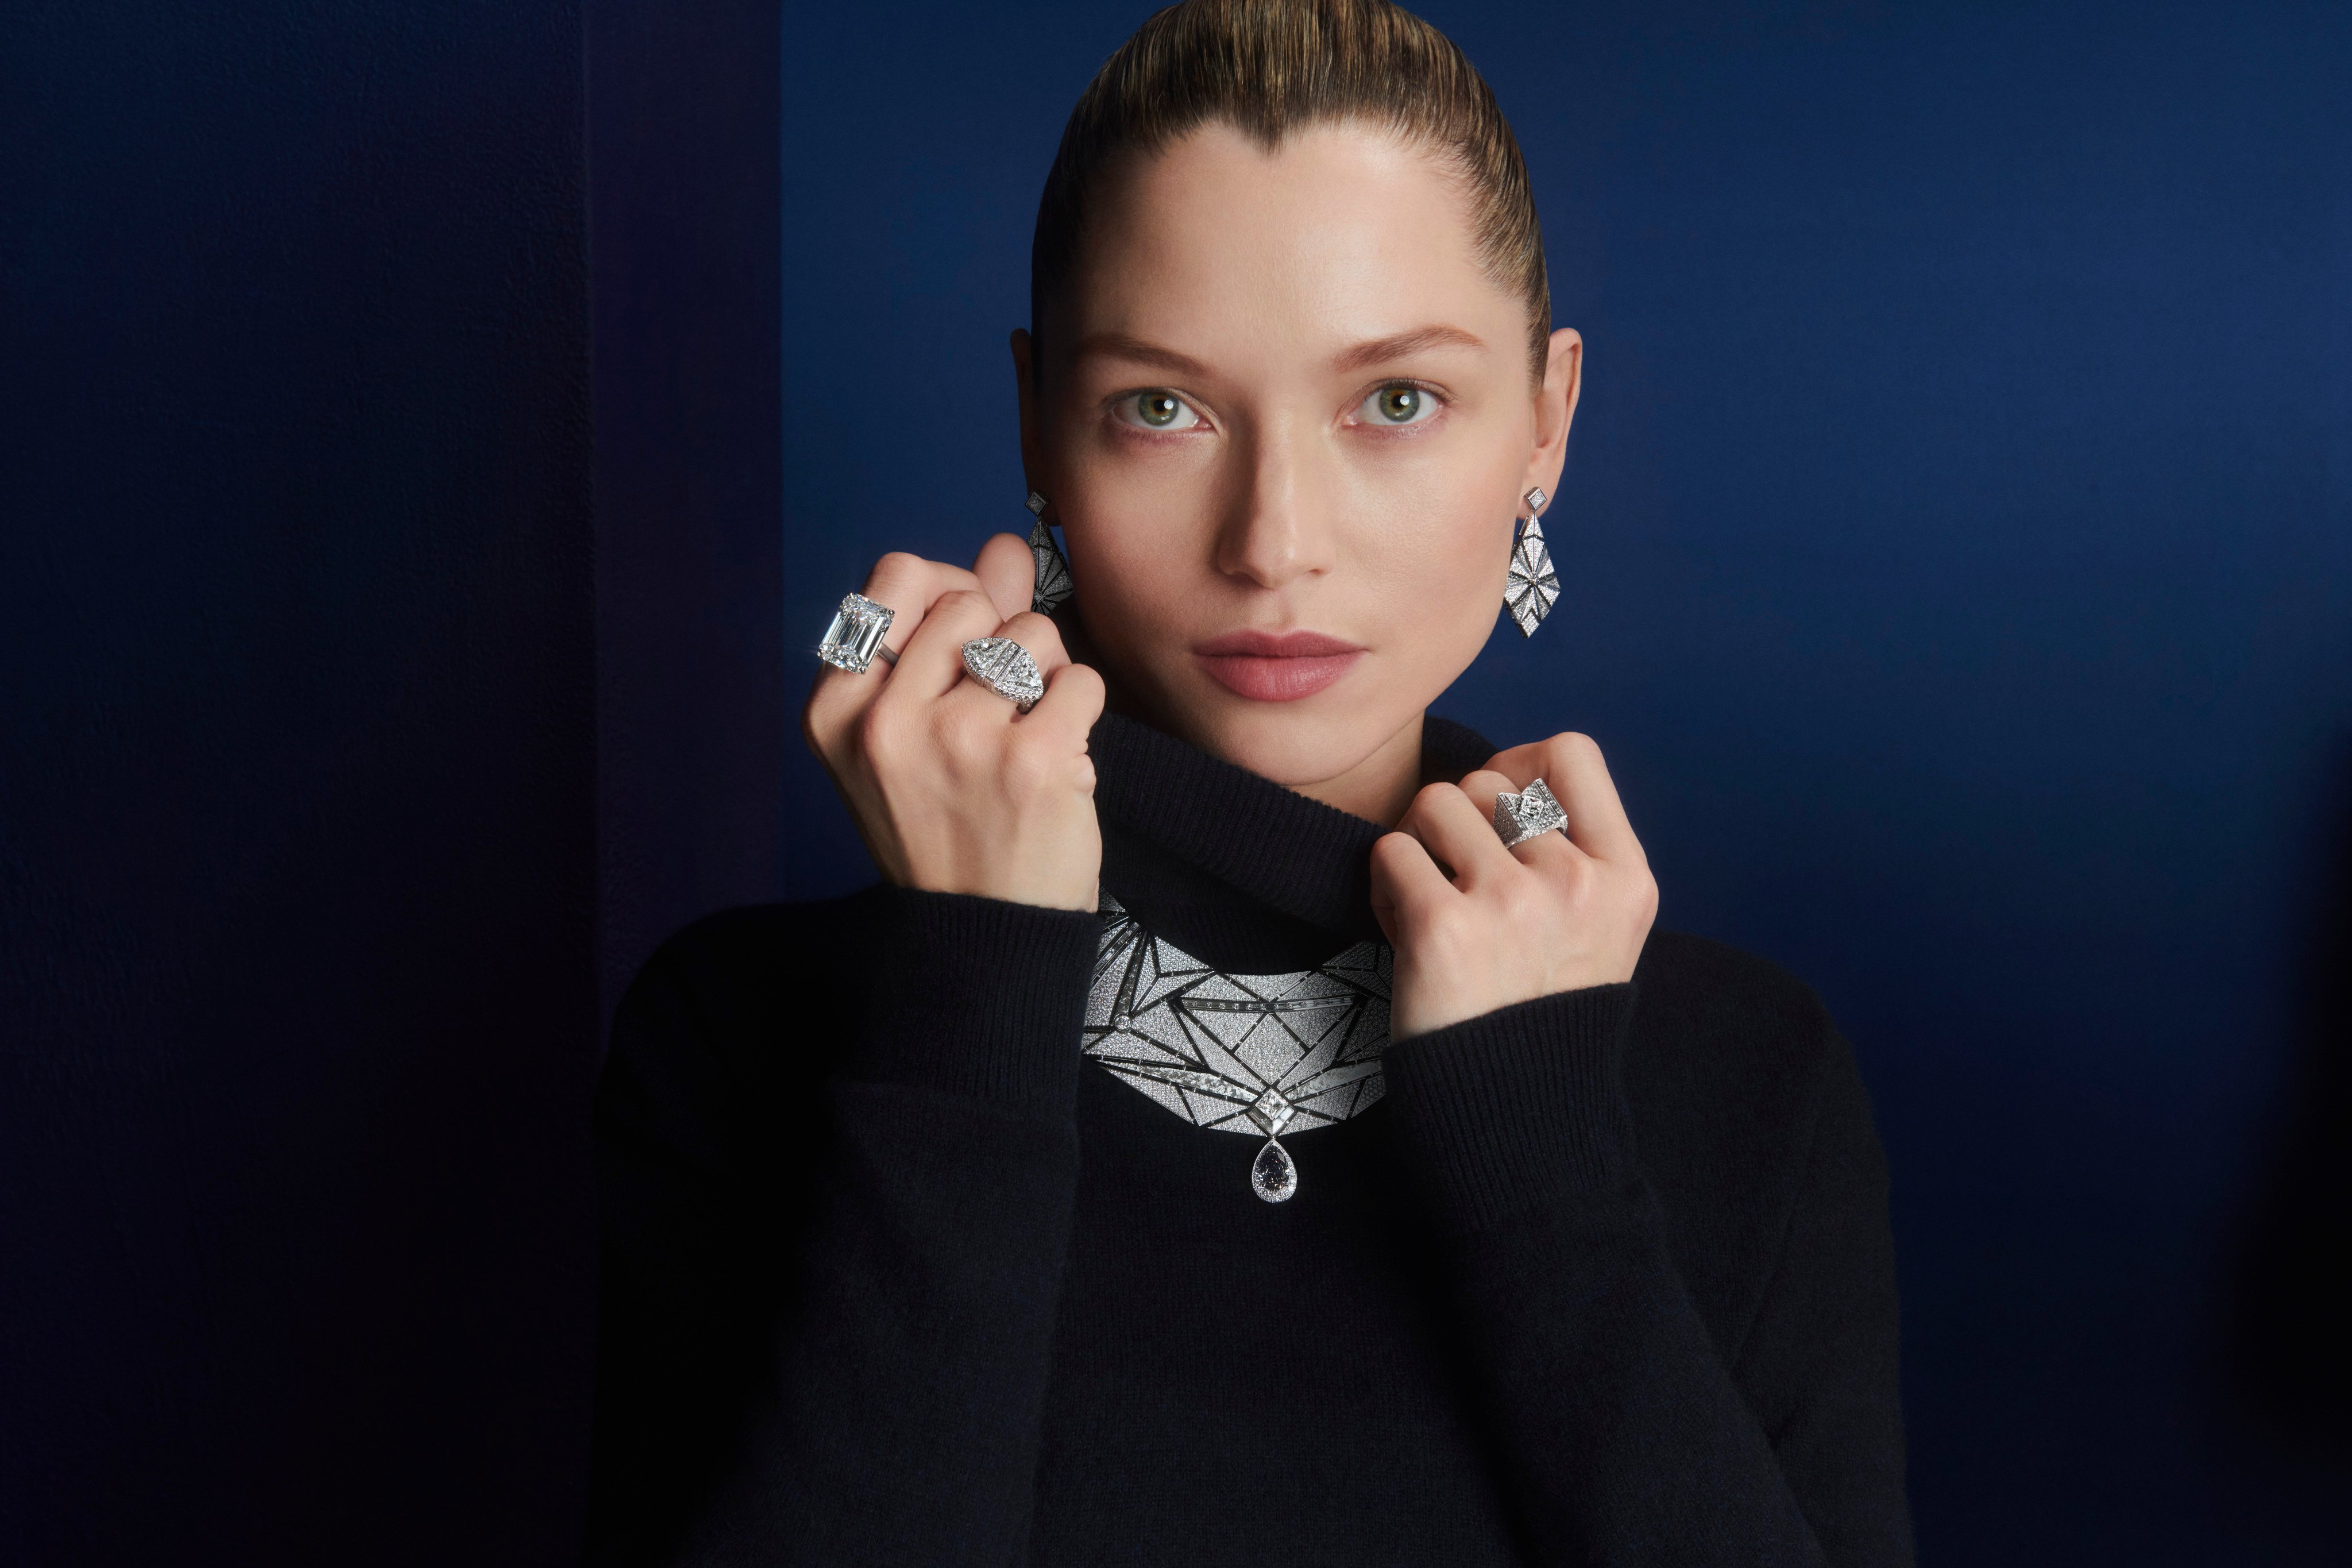 De Beers’ Metamorphosis collection reimagines the changing seasons, and the miraculous emergence of a butterfly, using natural diamonds including rough pinks and fancy intense yellows. Photos: Handout